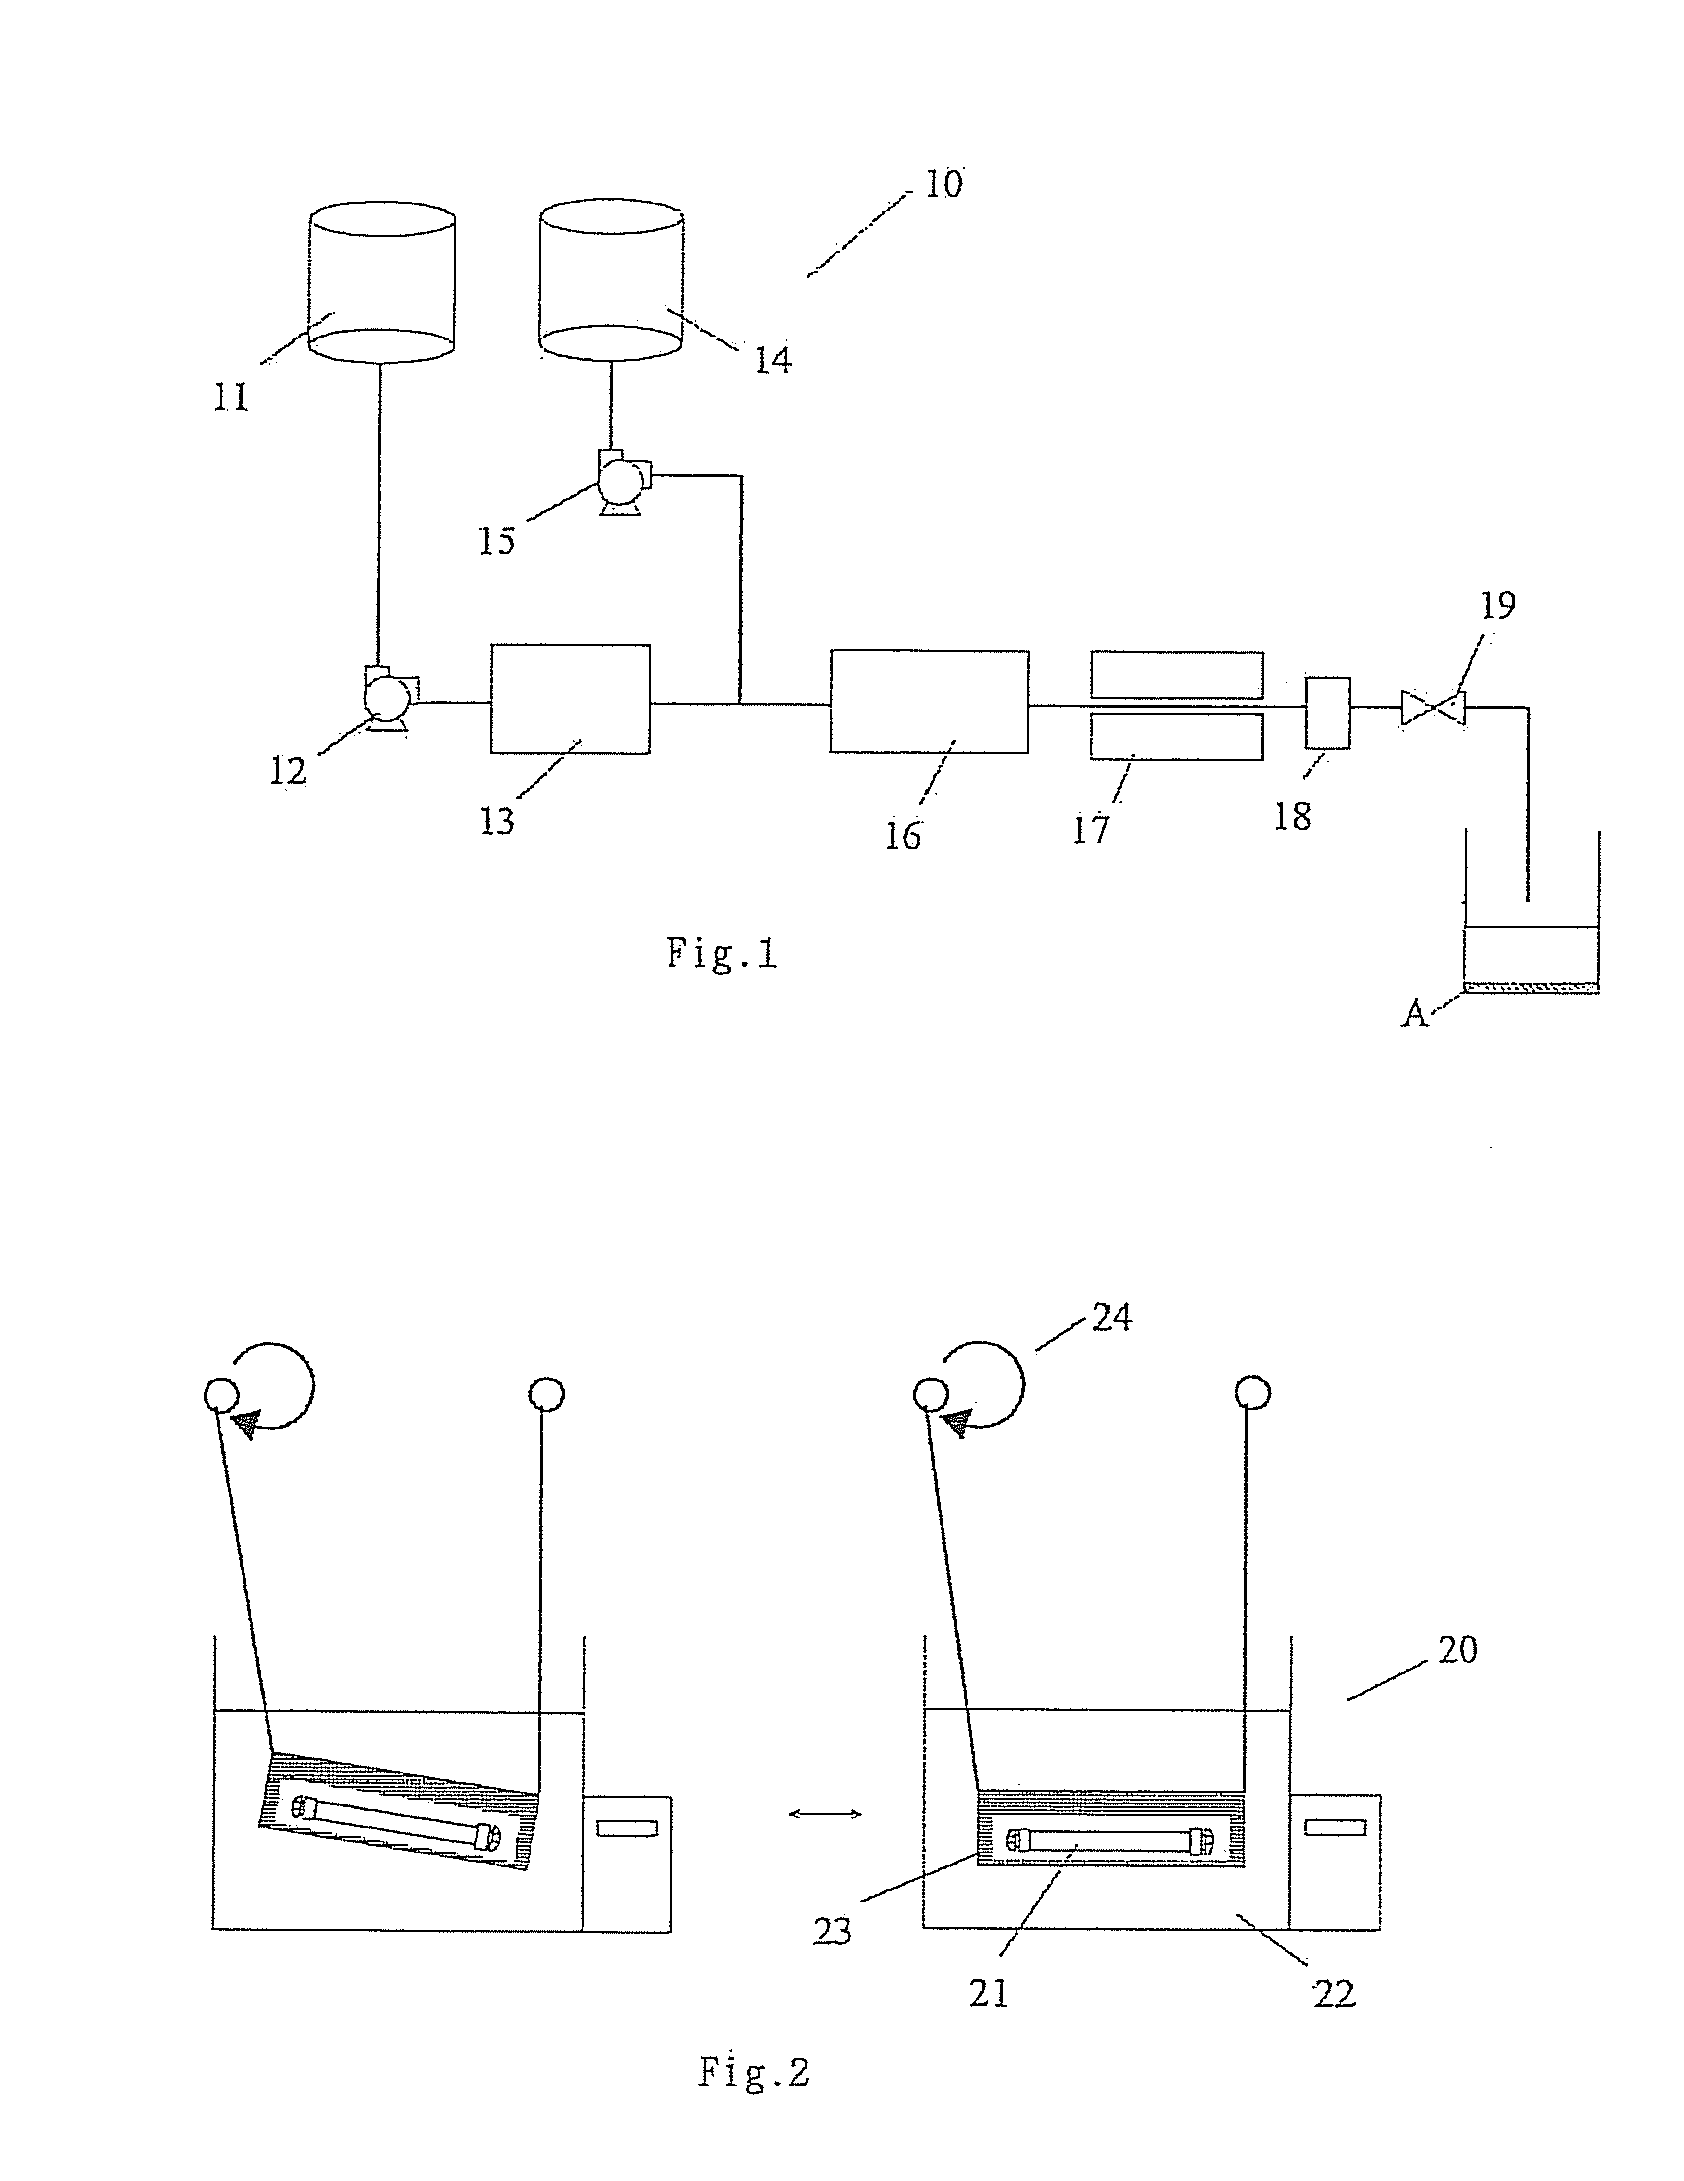 Method of producing starch having high-less digestible starch content